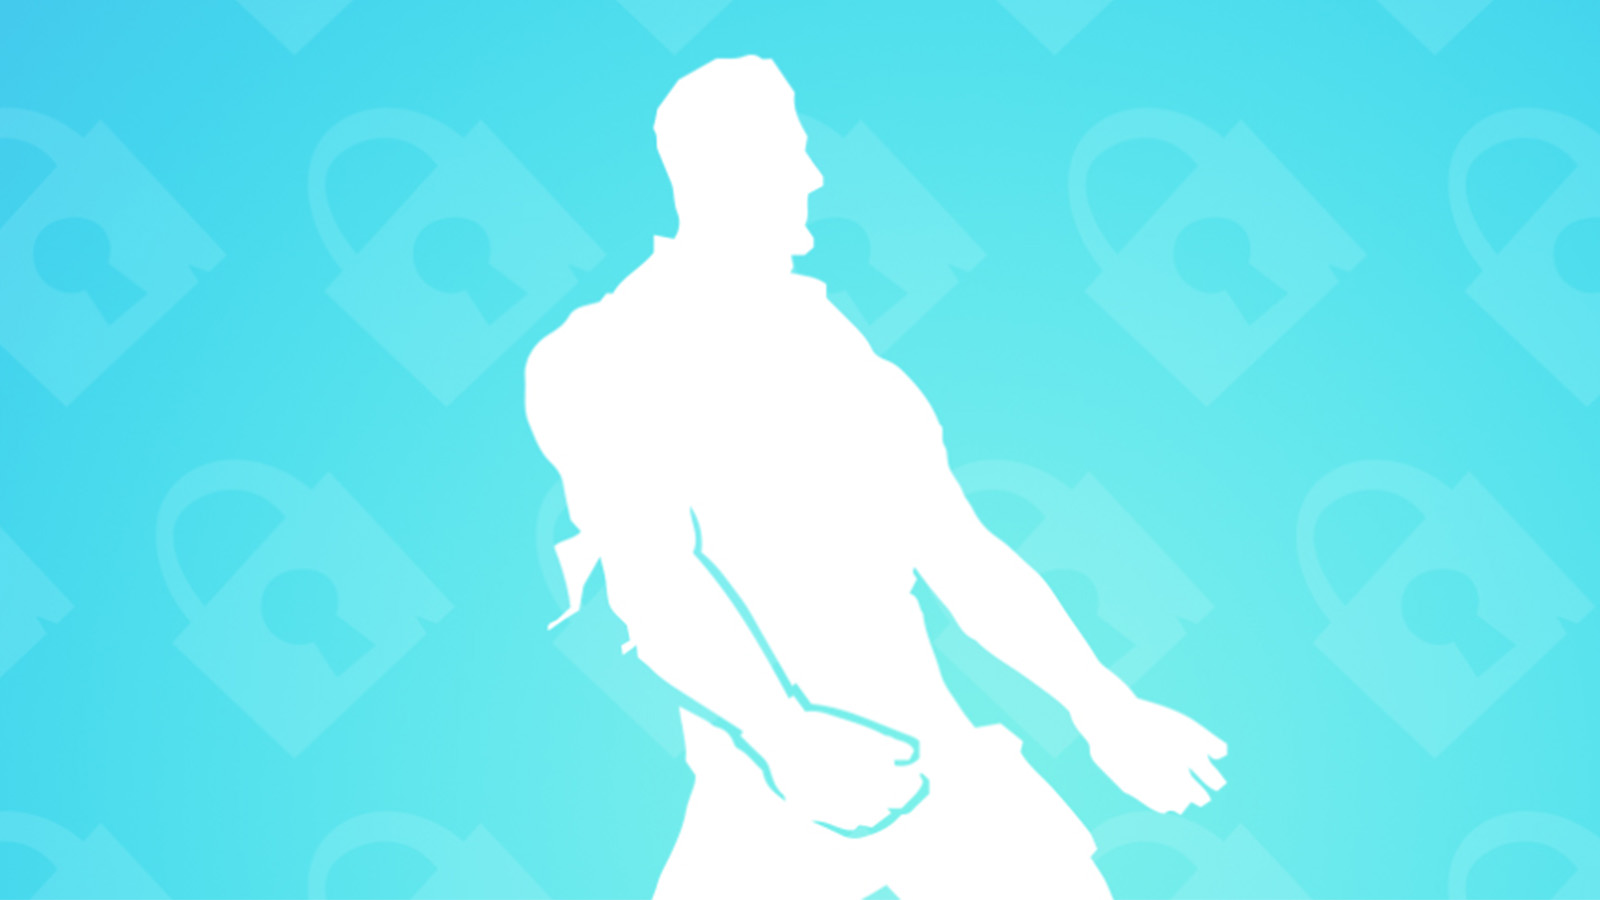 Fortnite 2FA: How to Enable Two-Factor Authentication, Get Rewards